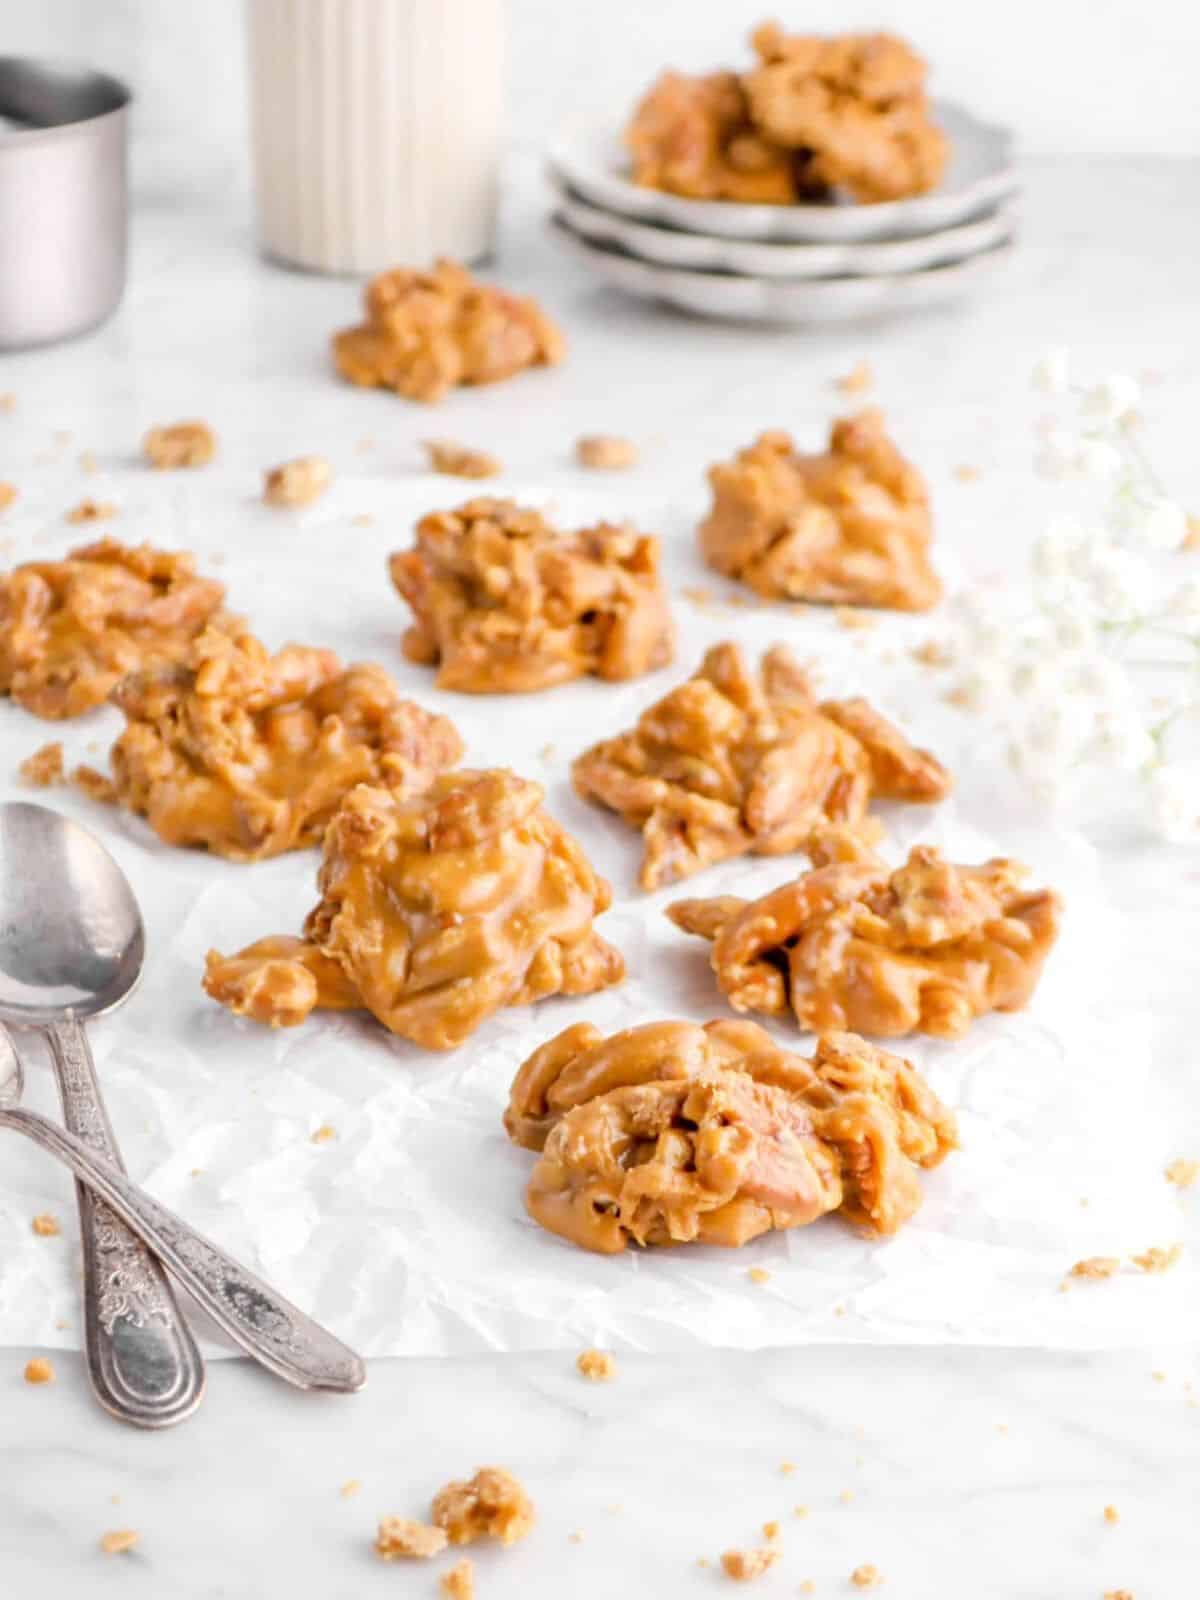 Southern Buttermilk Pecan Pralins, a delightful dessert featuring the rich flavor of buttermilk and the crunch of pecans.